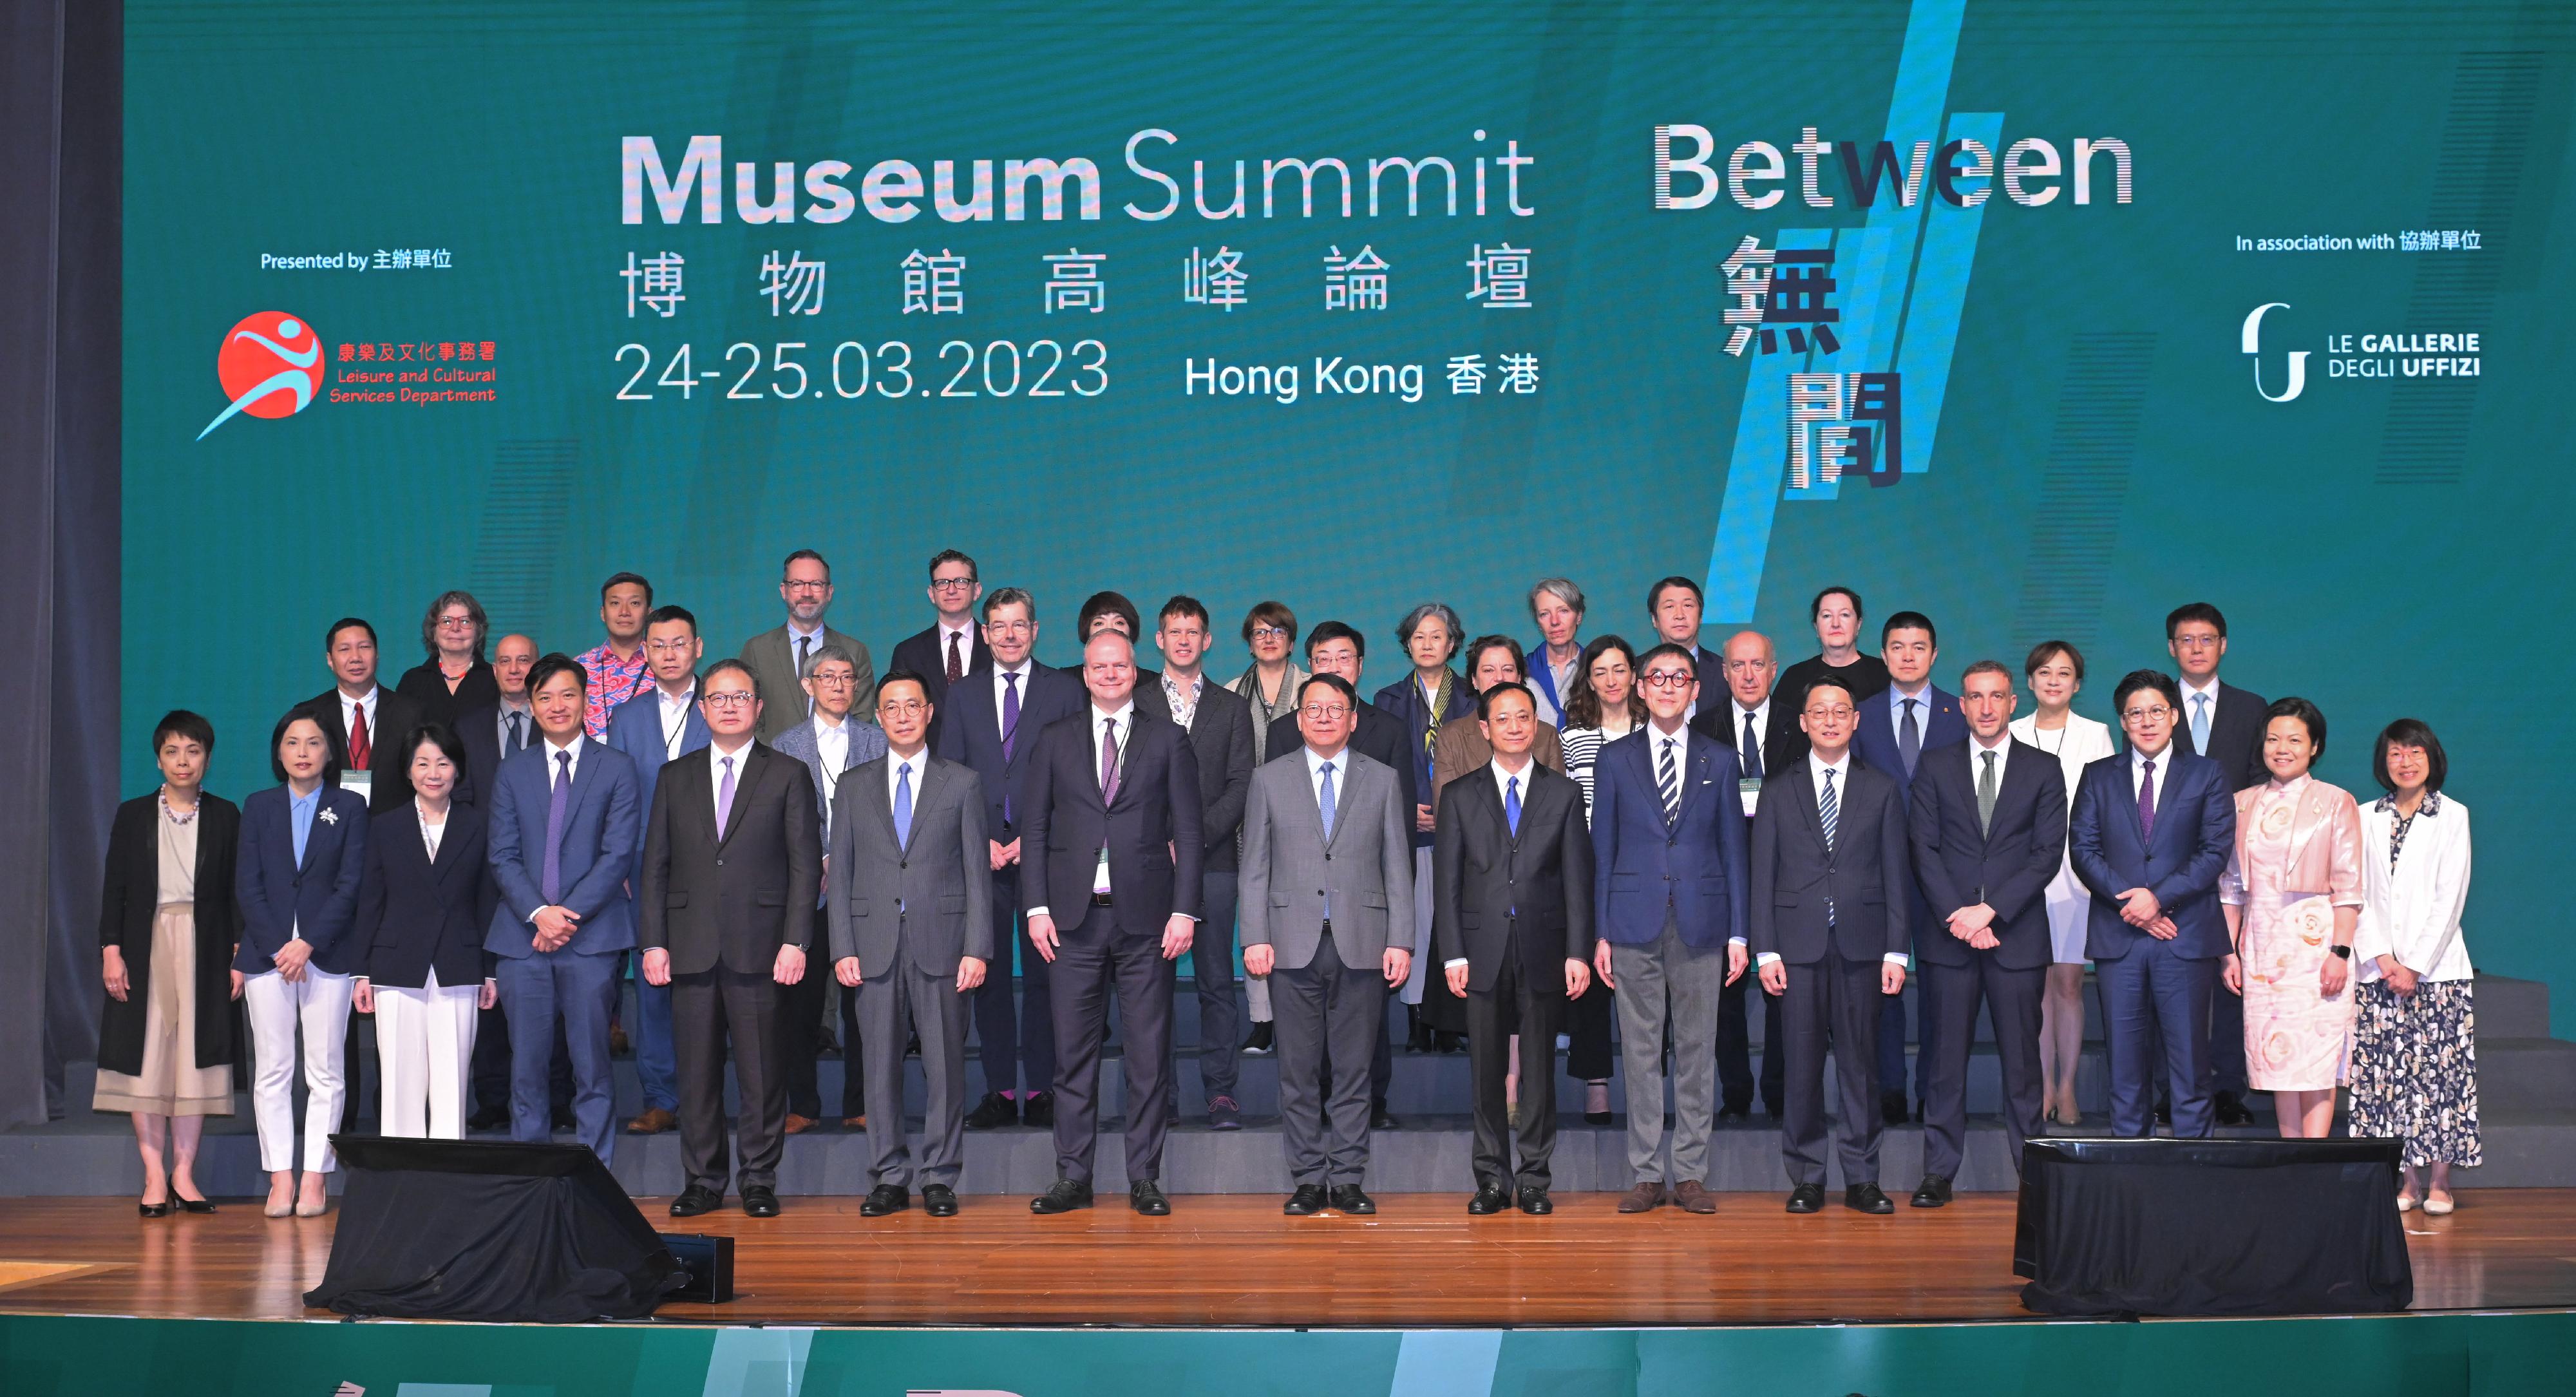 The Chief Secretary for Administration, Mr Chan Kwok-ki, attended the opening ceremony of the Museum Summit 2023 today (March 24). Photo shows Mr Chan (first row, eighth left); the Secretary for Culture, Sports and Tourism, Mr Kevin Yeung (first row, sixth left); the Director of Gallerie degli Uffizi, Dr Eike Schmidt (first row, seventh left) ; Deputy Administrator of the National Cultural Heritage Administration Mr Gu Yucai (first row, ninth left), and other guests at the event.